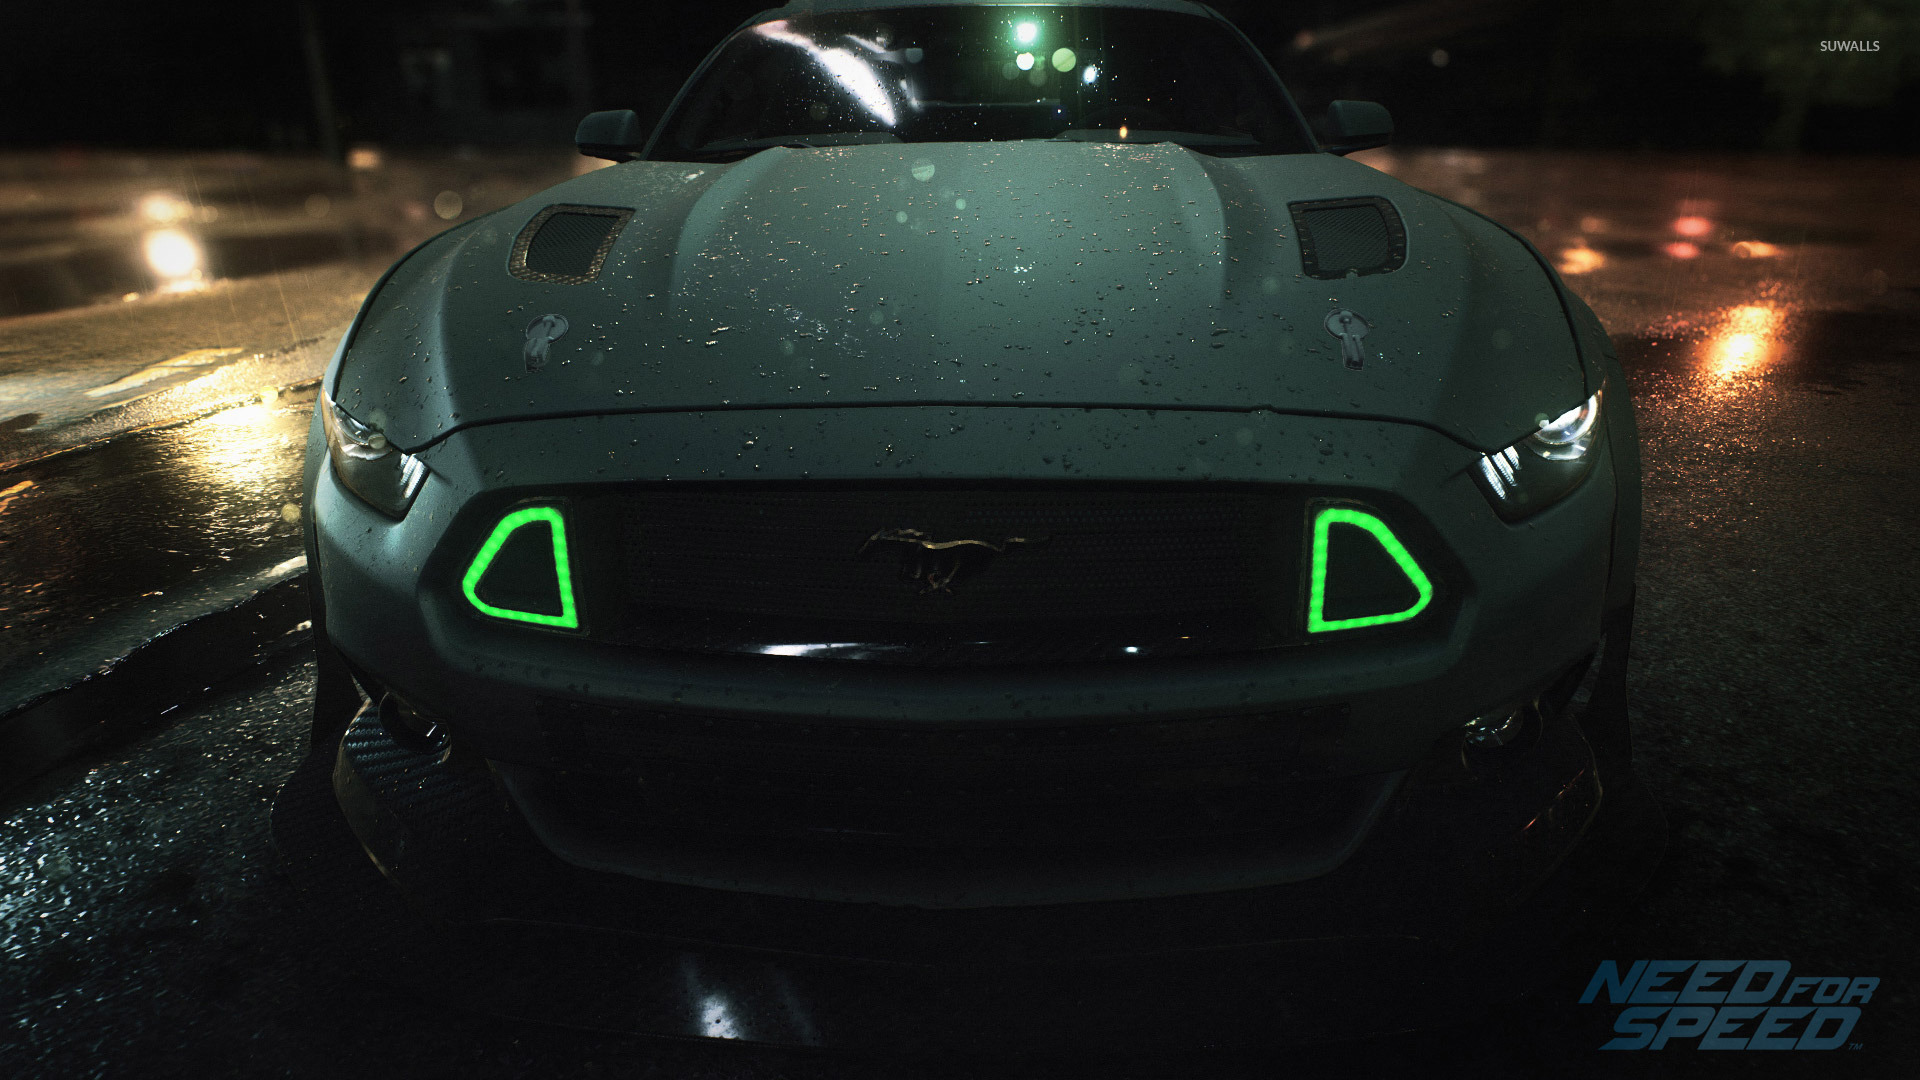 Ps4 Need For Speed Mustang